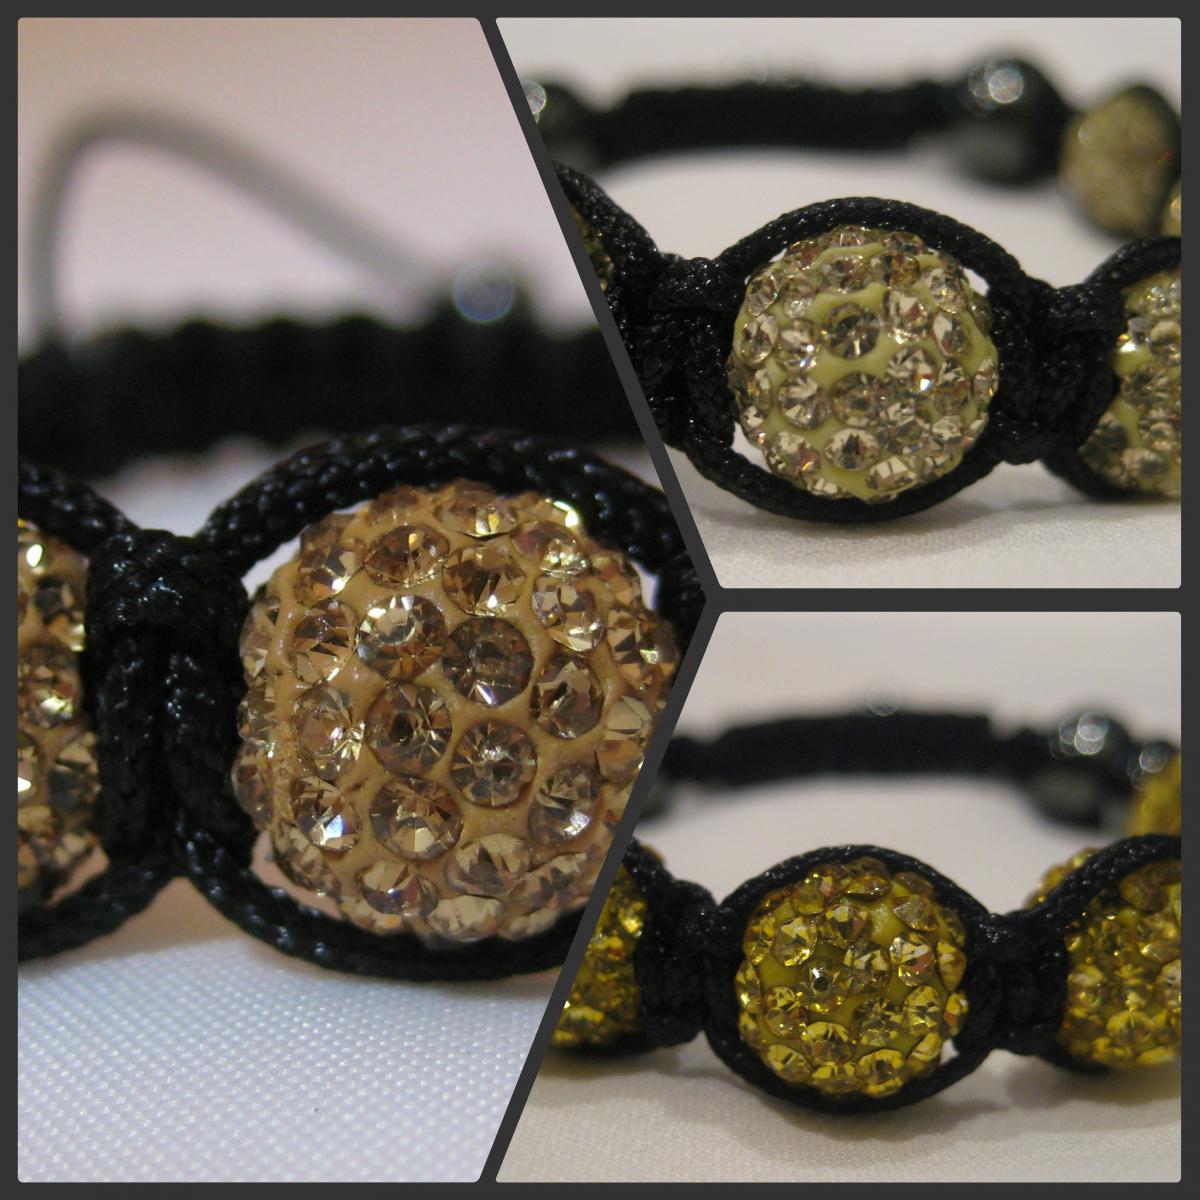 One Colour - Golds Champagne, Lemon Or Yellow Gold Crystal Pave Bead Macrame Friendship Bracelet